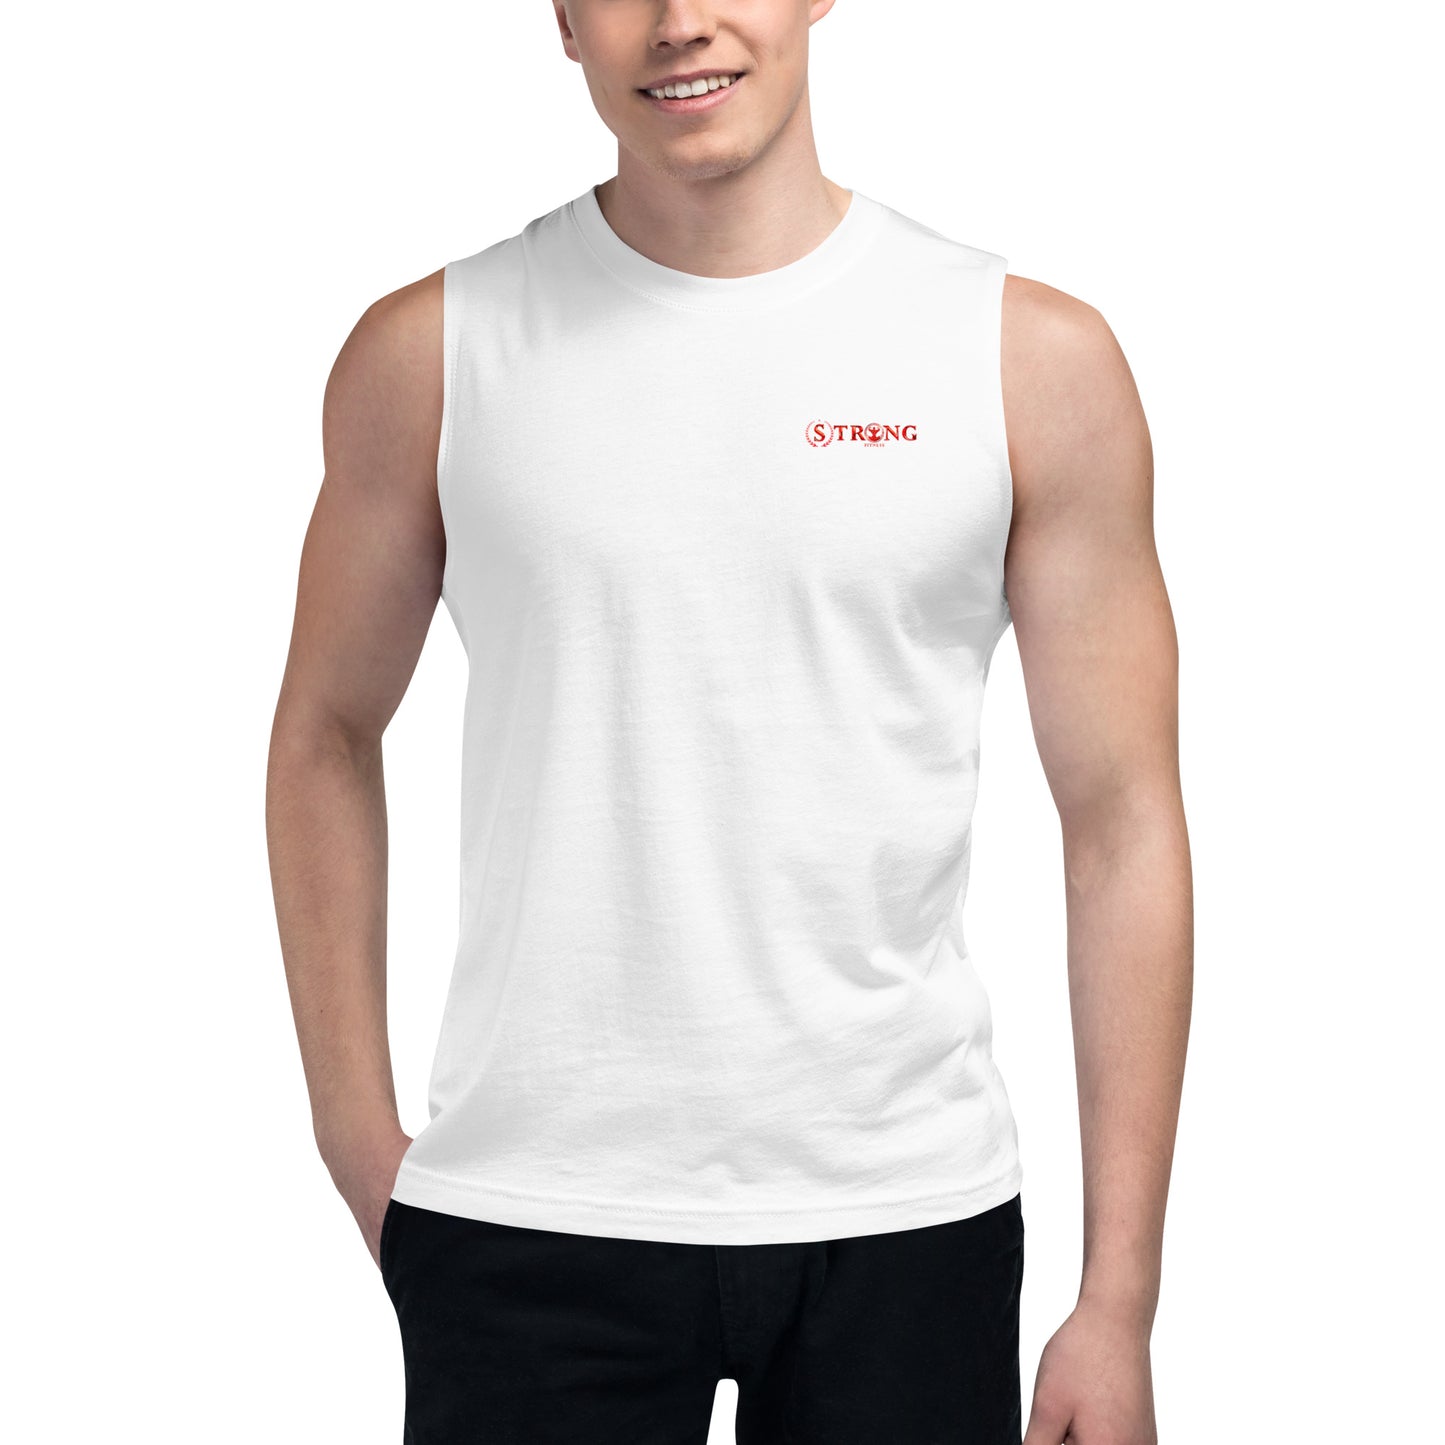 Muscle Shirt,Strong Fitness